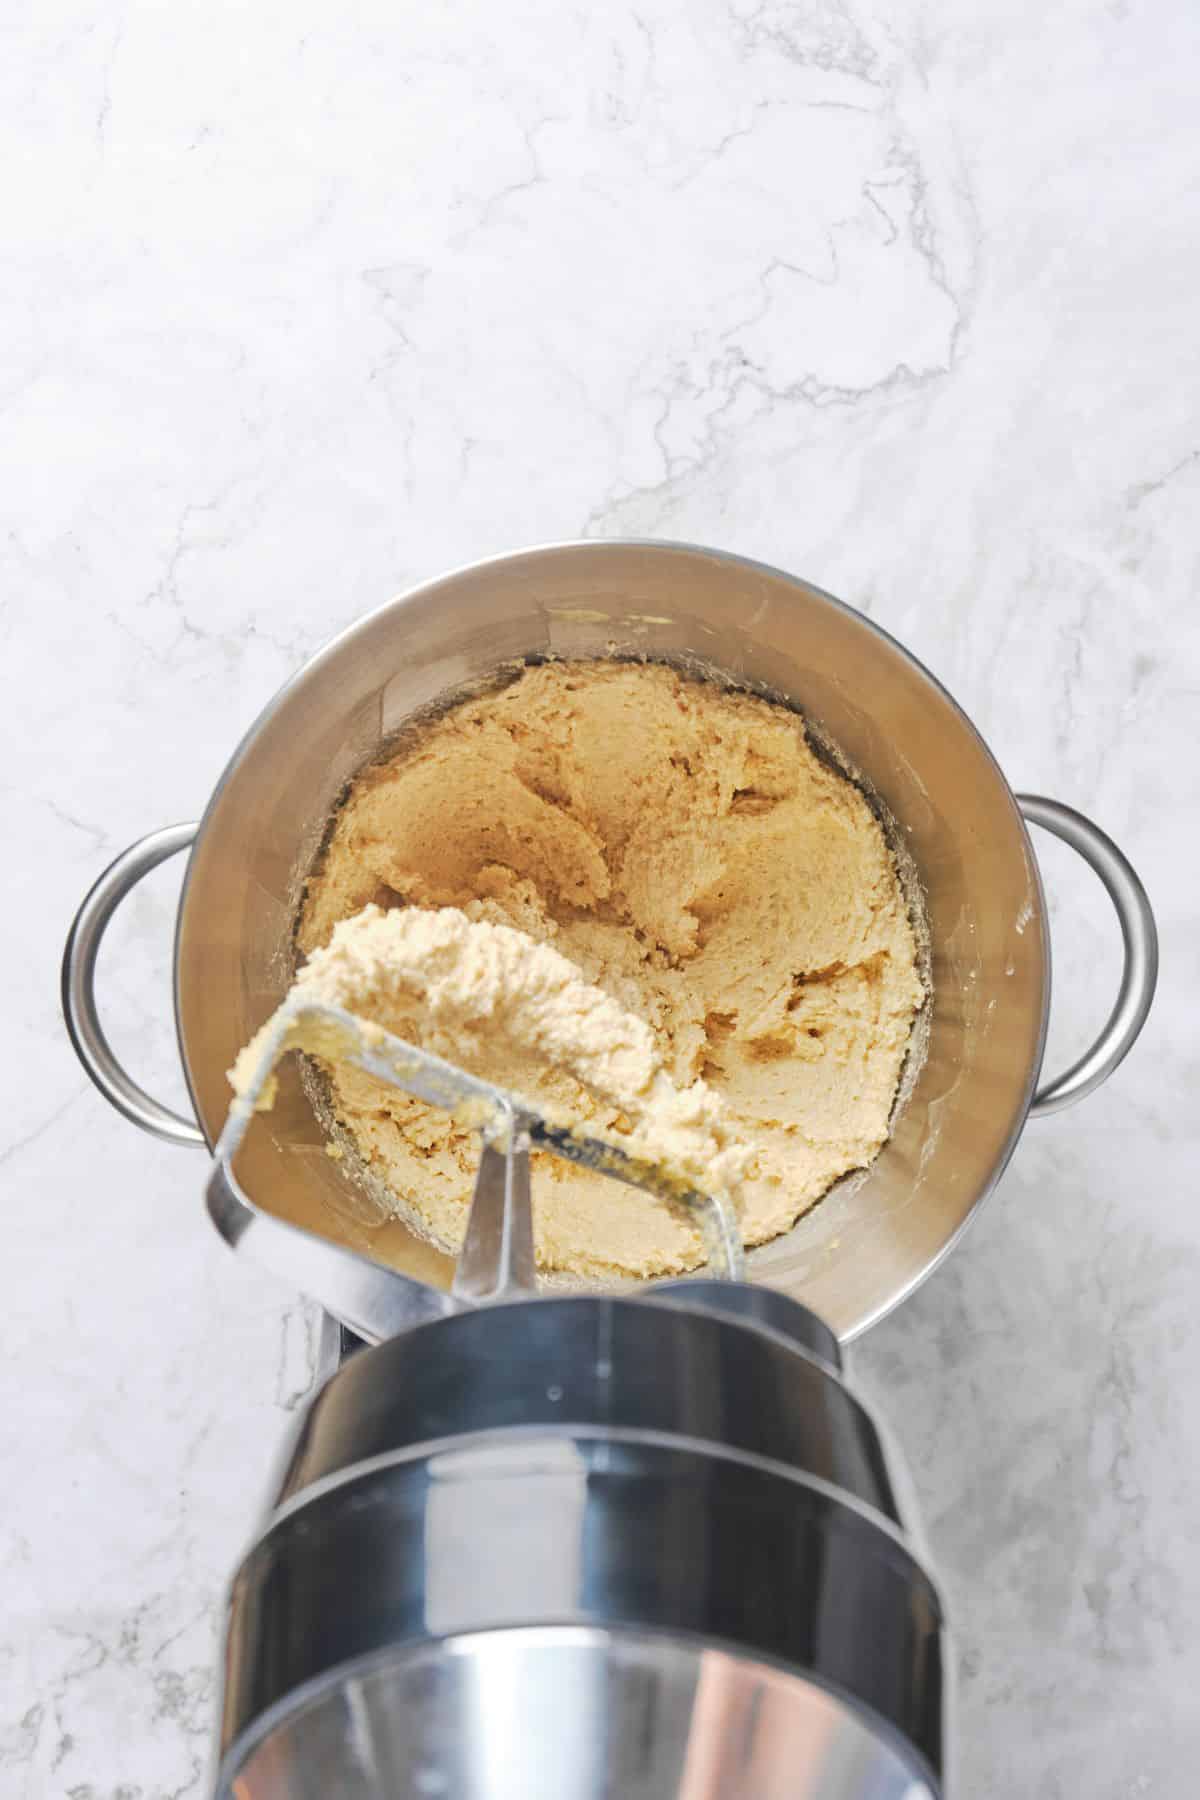 Butter and sugars creamed in a stand mixer.